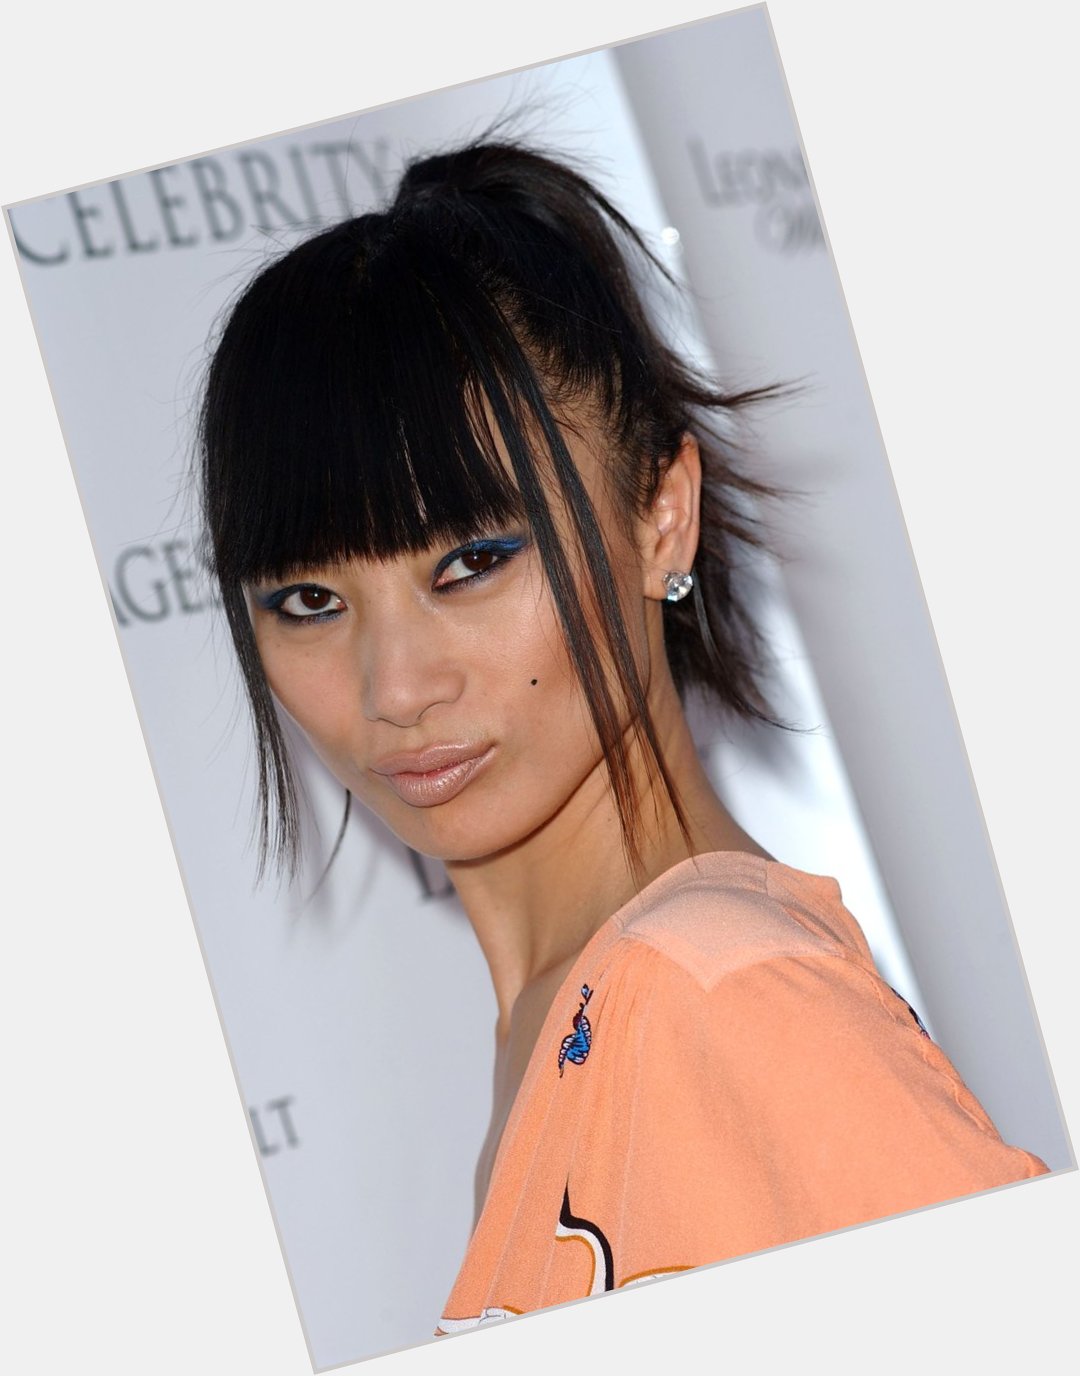 Happy Birthday to Bai Ling who turns 53 today! 